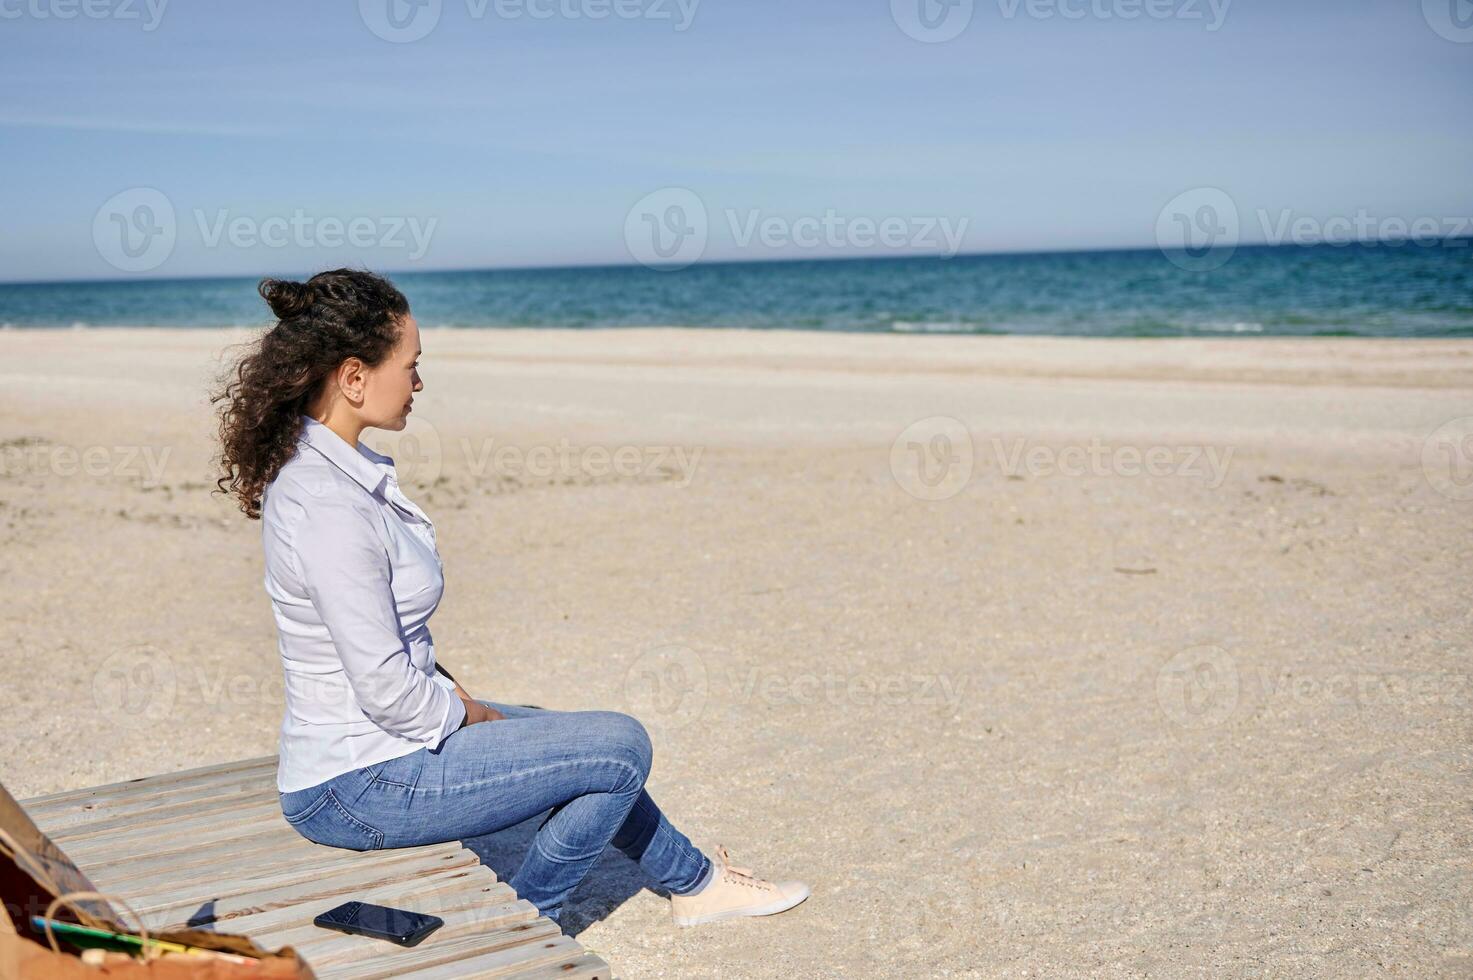 Serene woman sitting on a wooden chaise lounge sitting on lonely beach and enjoying the tranquil view to the seashore. Tranquil non urban scene, leisure activity and relaxation time concepts photo